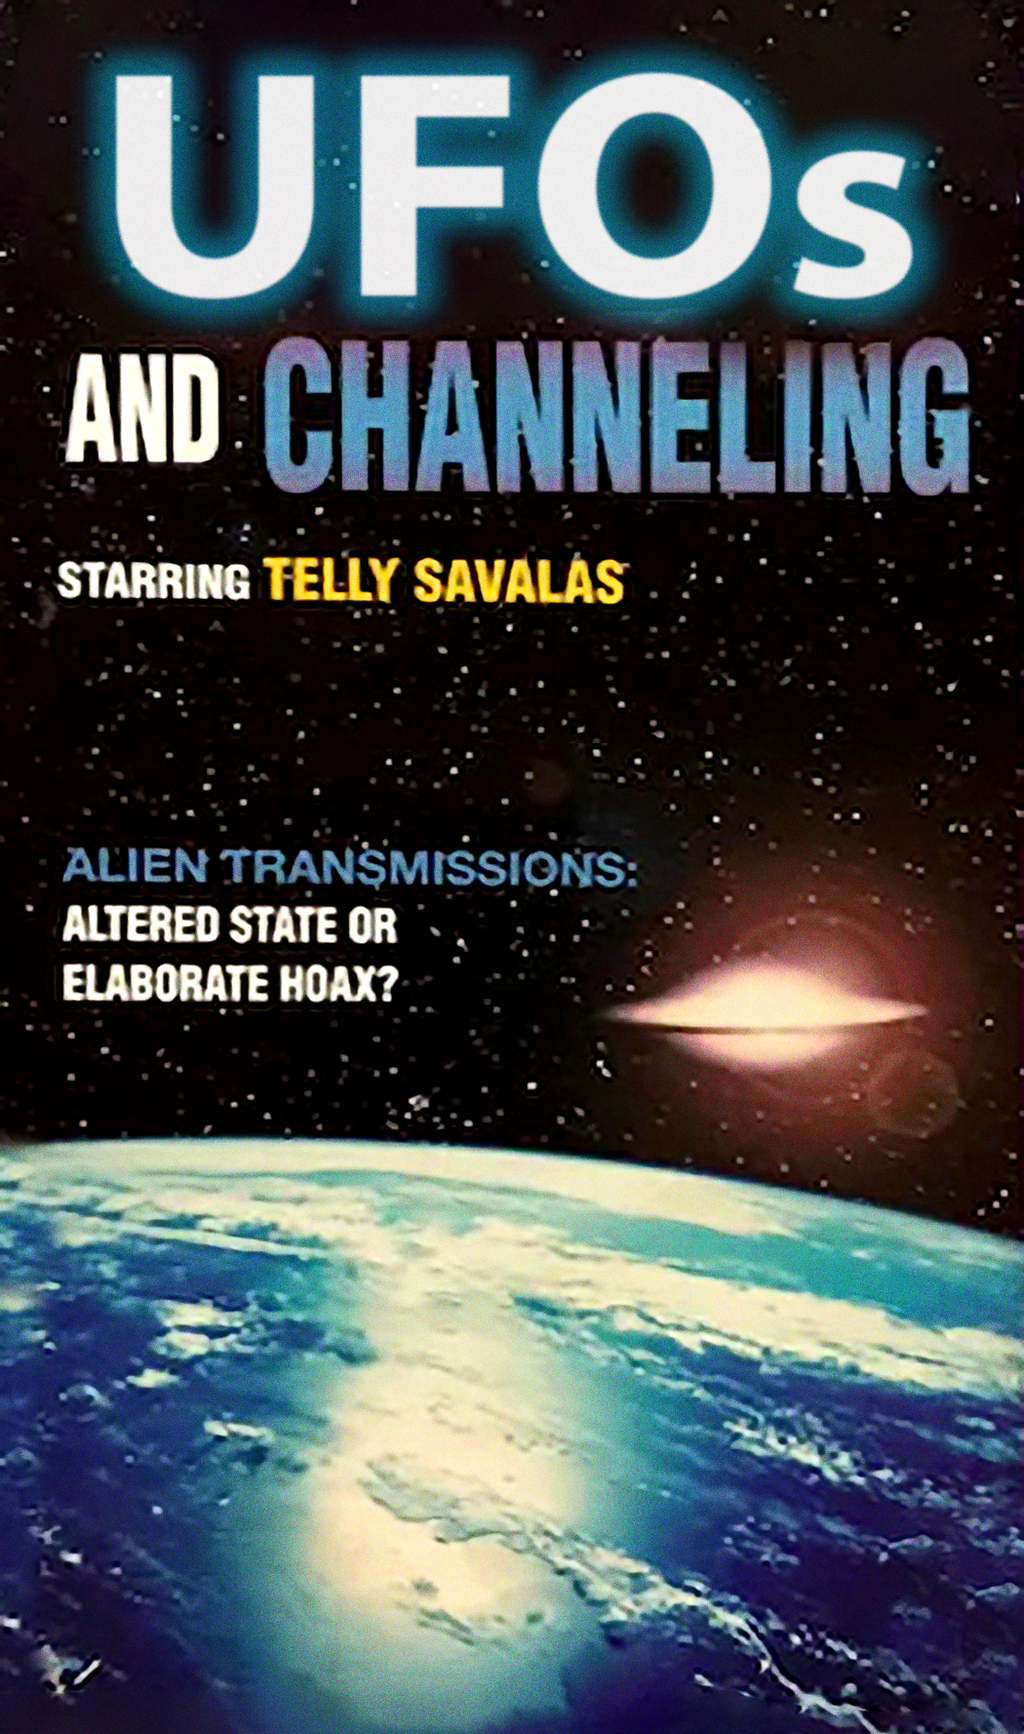 Ufos & Channeling with Telly Savalas